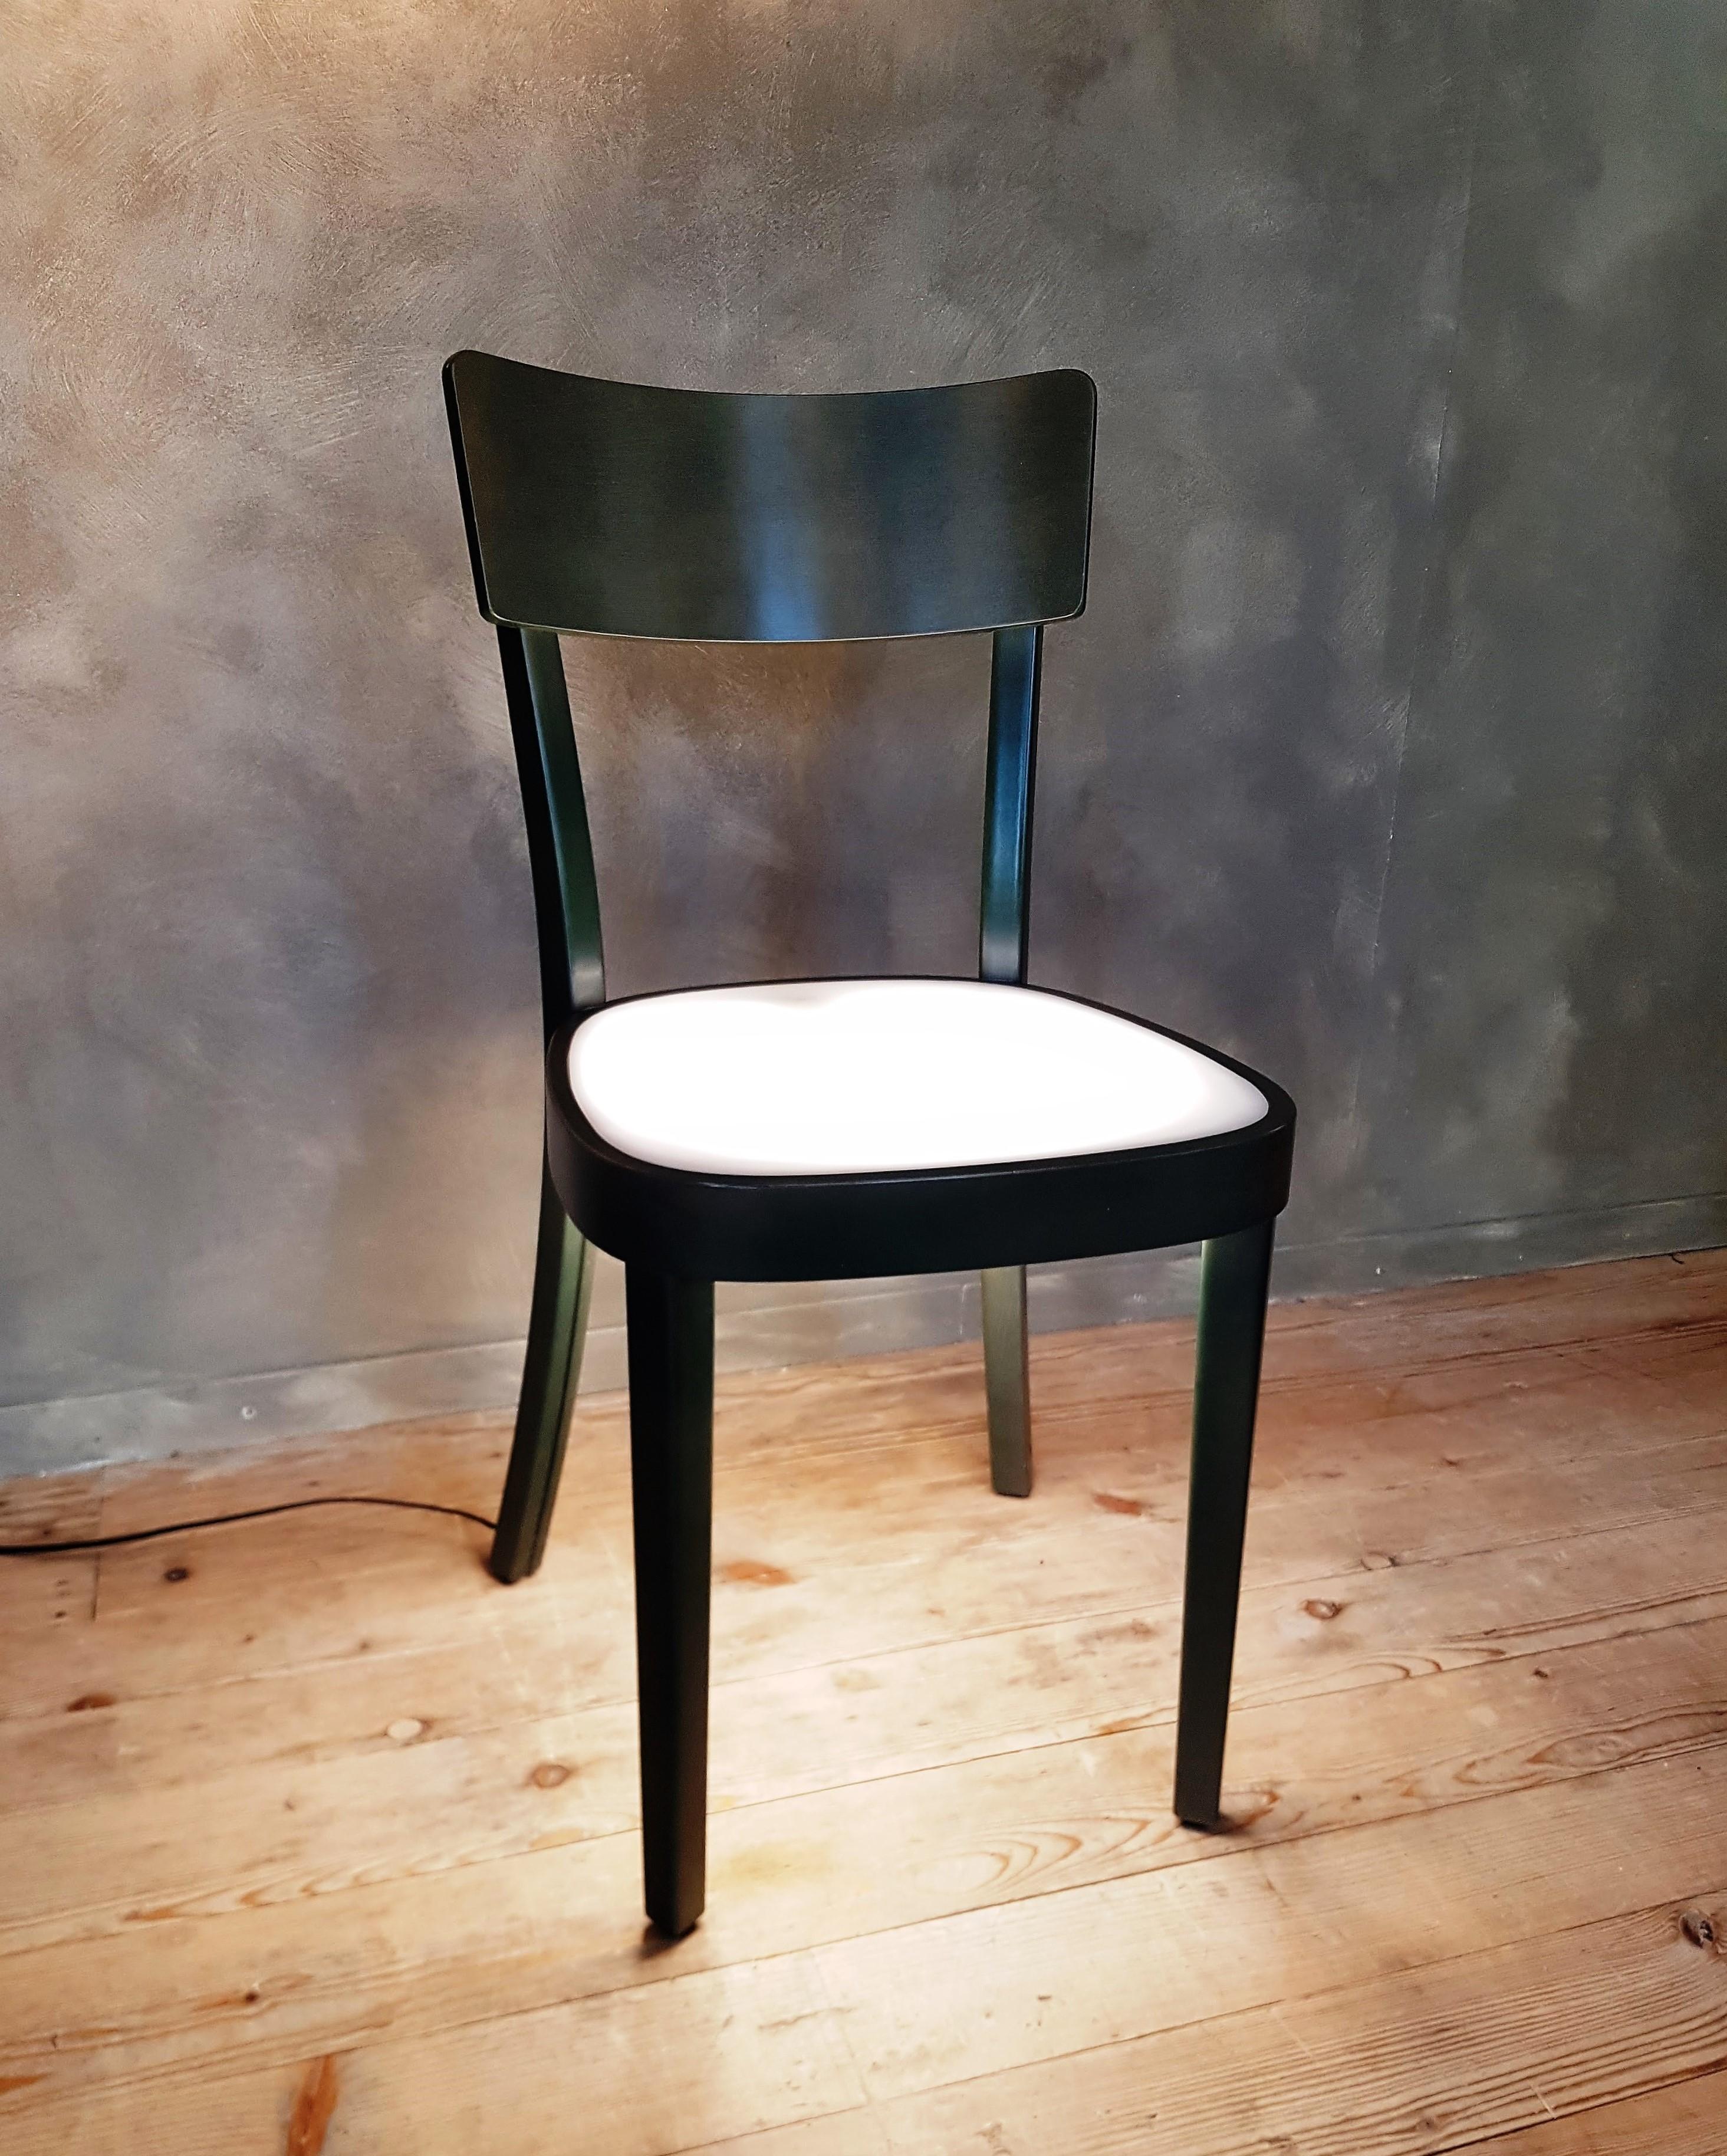 The traditional Swiss company Horgen-Glarus has been producing the Classic 1-380 chair since 1918.

Not only has the Classic been part of the Horgen-Glarus program for almost 100 years, it has set standards and is therefore classics classic. It